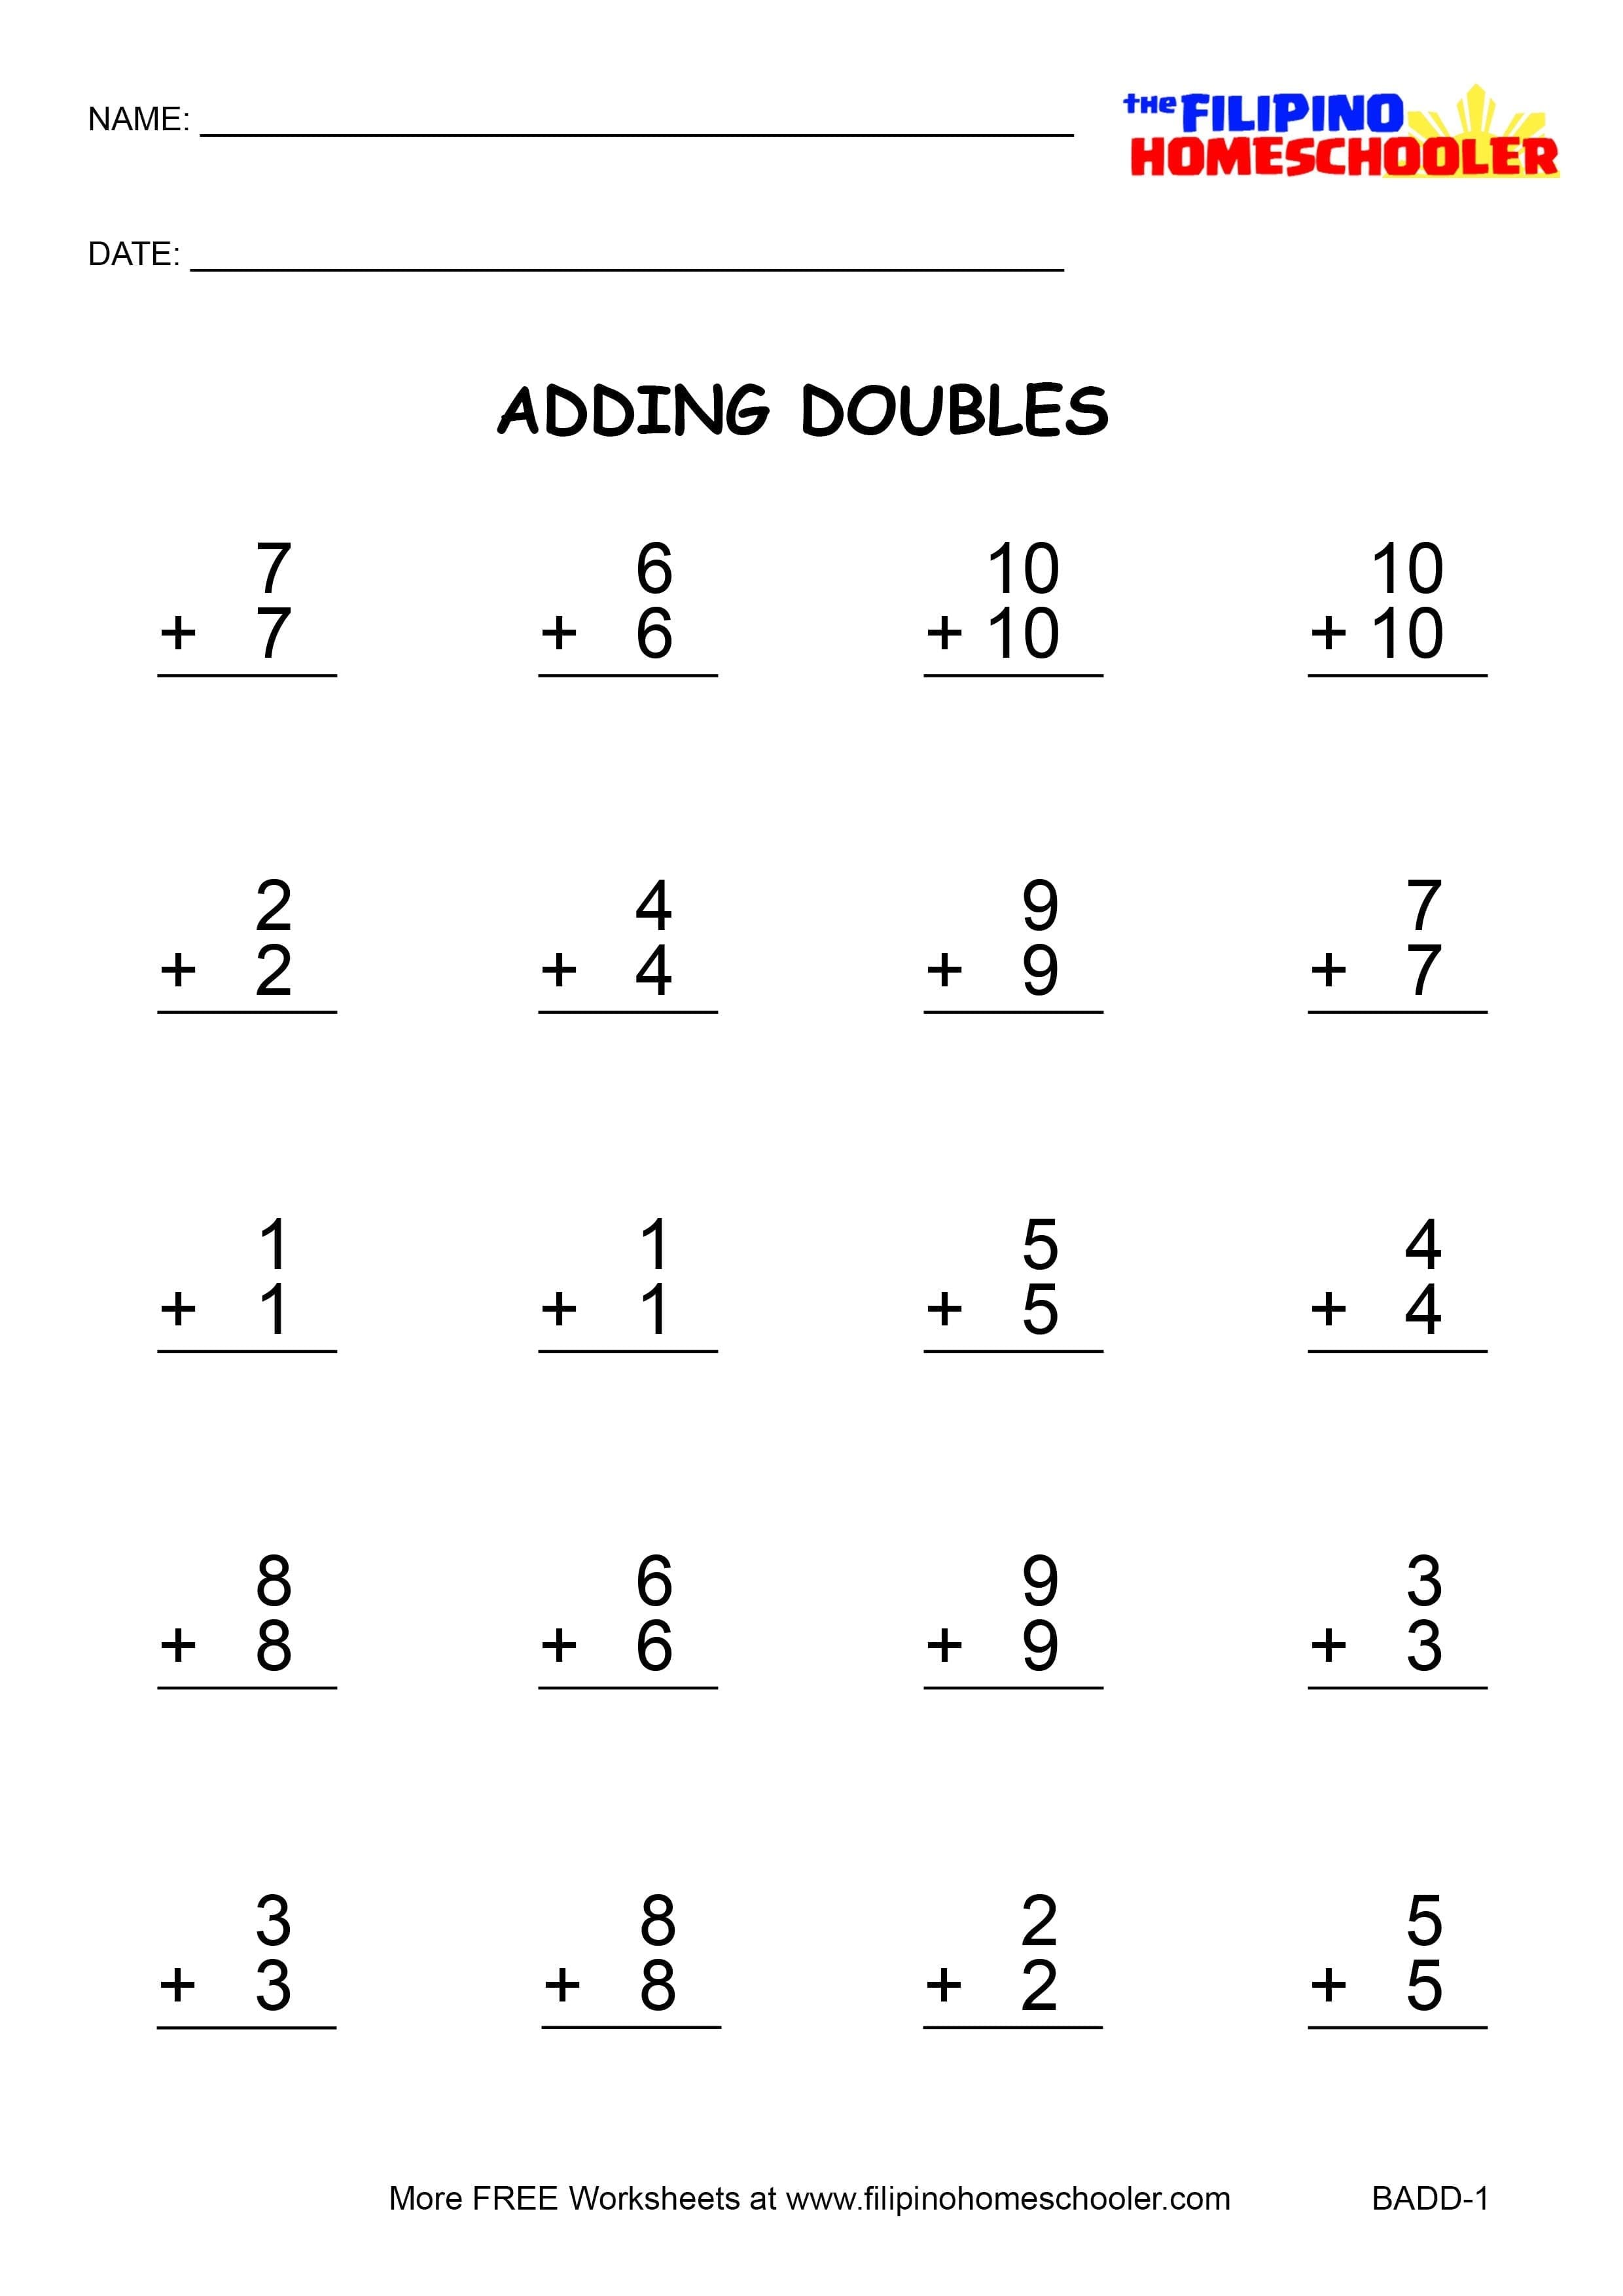 Adding Doubles Worksheets And Teaching Strategies – The Filipino Intended For Adding Doubles Worksheets